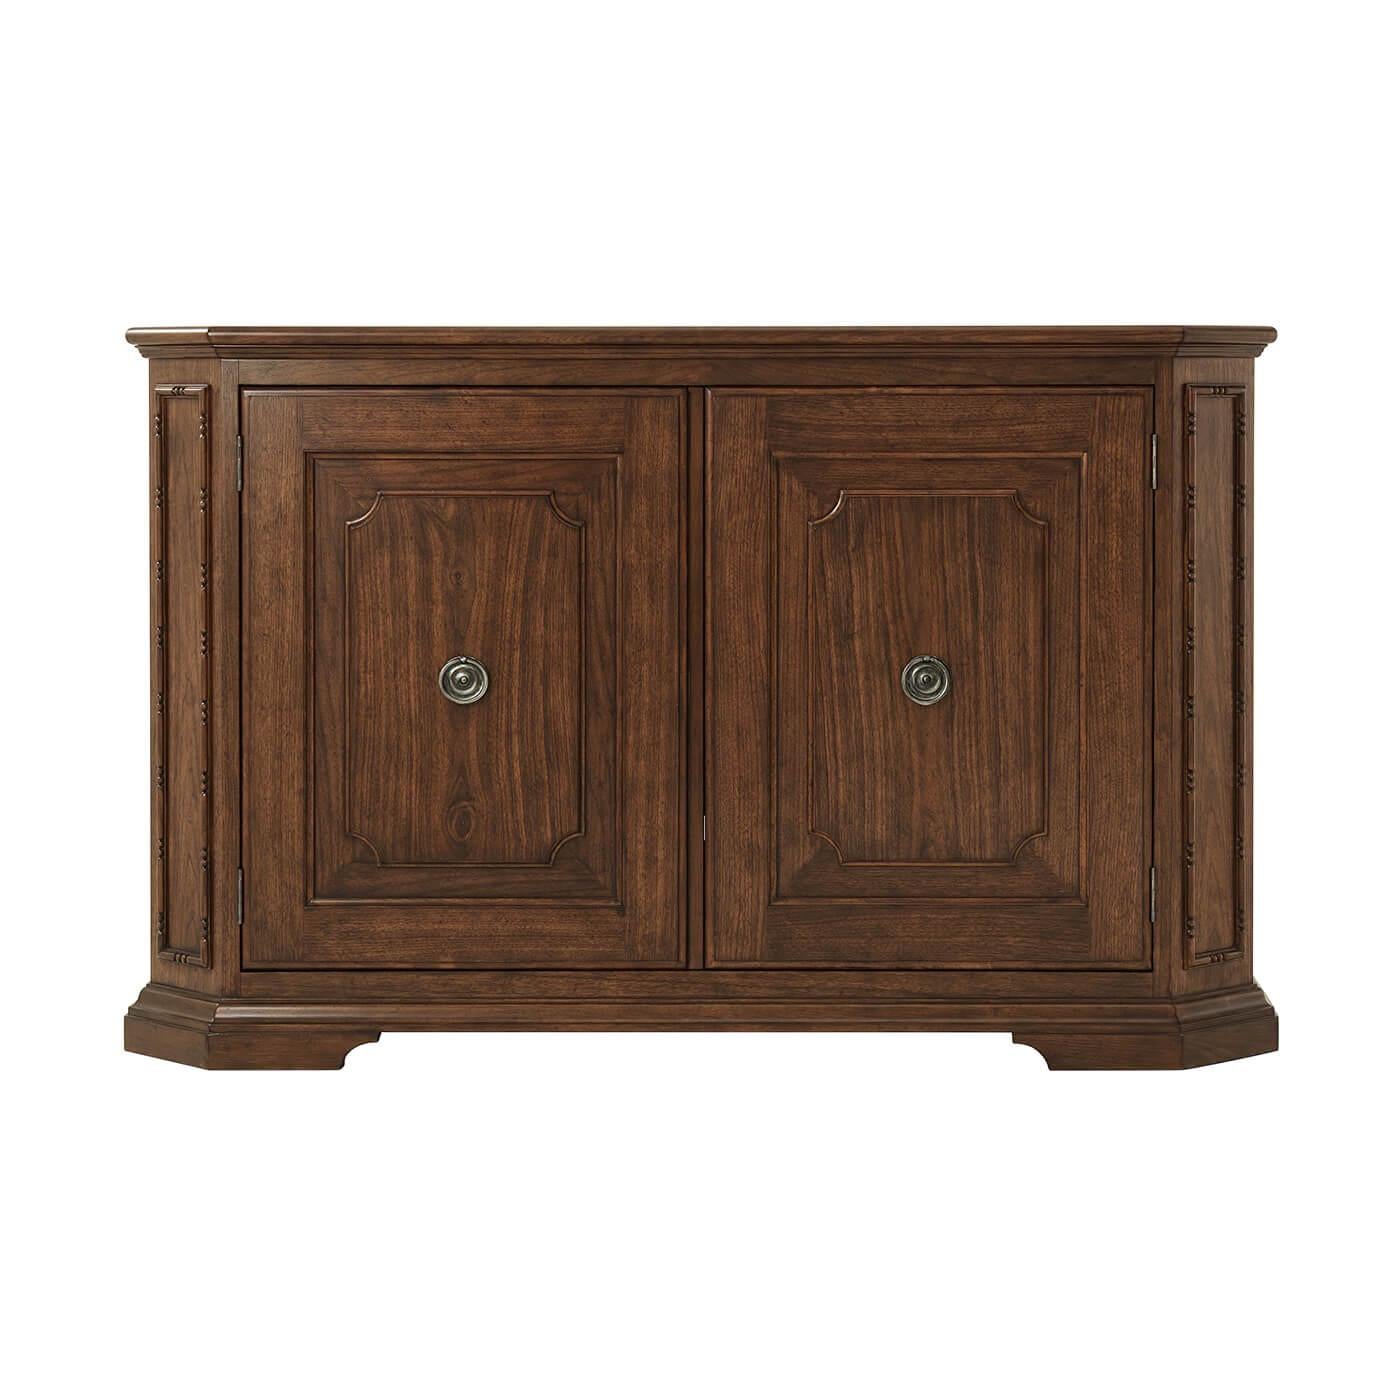 Northern European walnut buffet with a rectangular top having canted corners with paneled and angled uprights, two cabinet doors, the interior with two adjustable shelves and raised on molded bracket feet.

Dimensions: 65